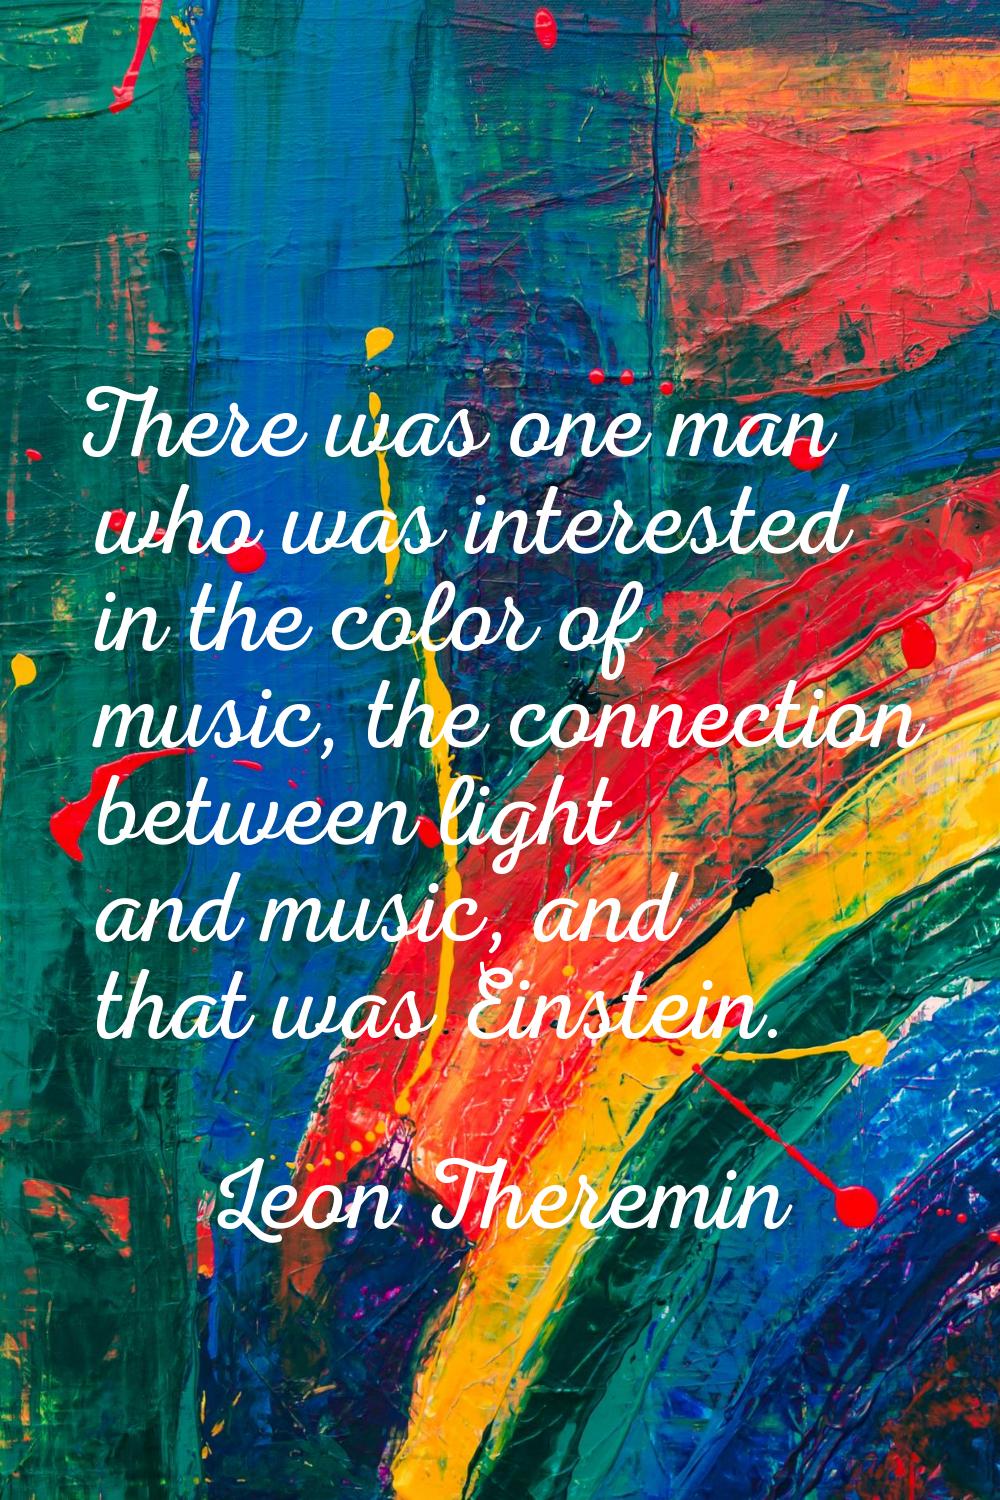 There was one man who was interested in the color of music, the connection between light and music,